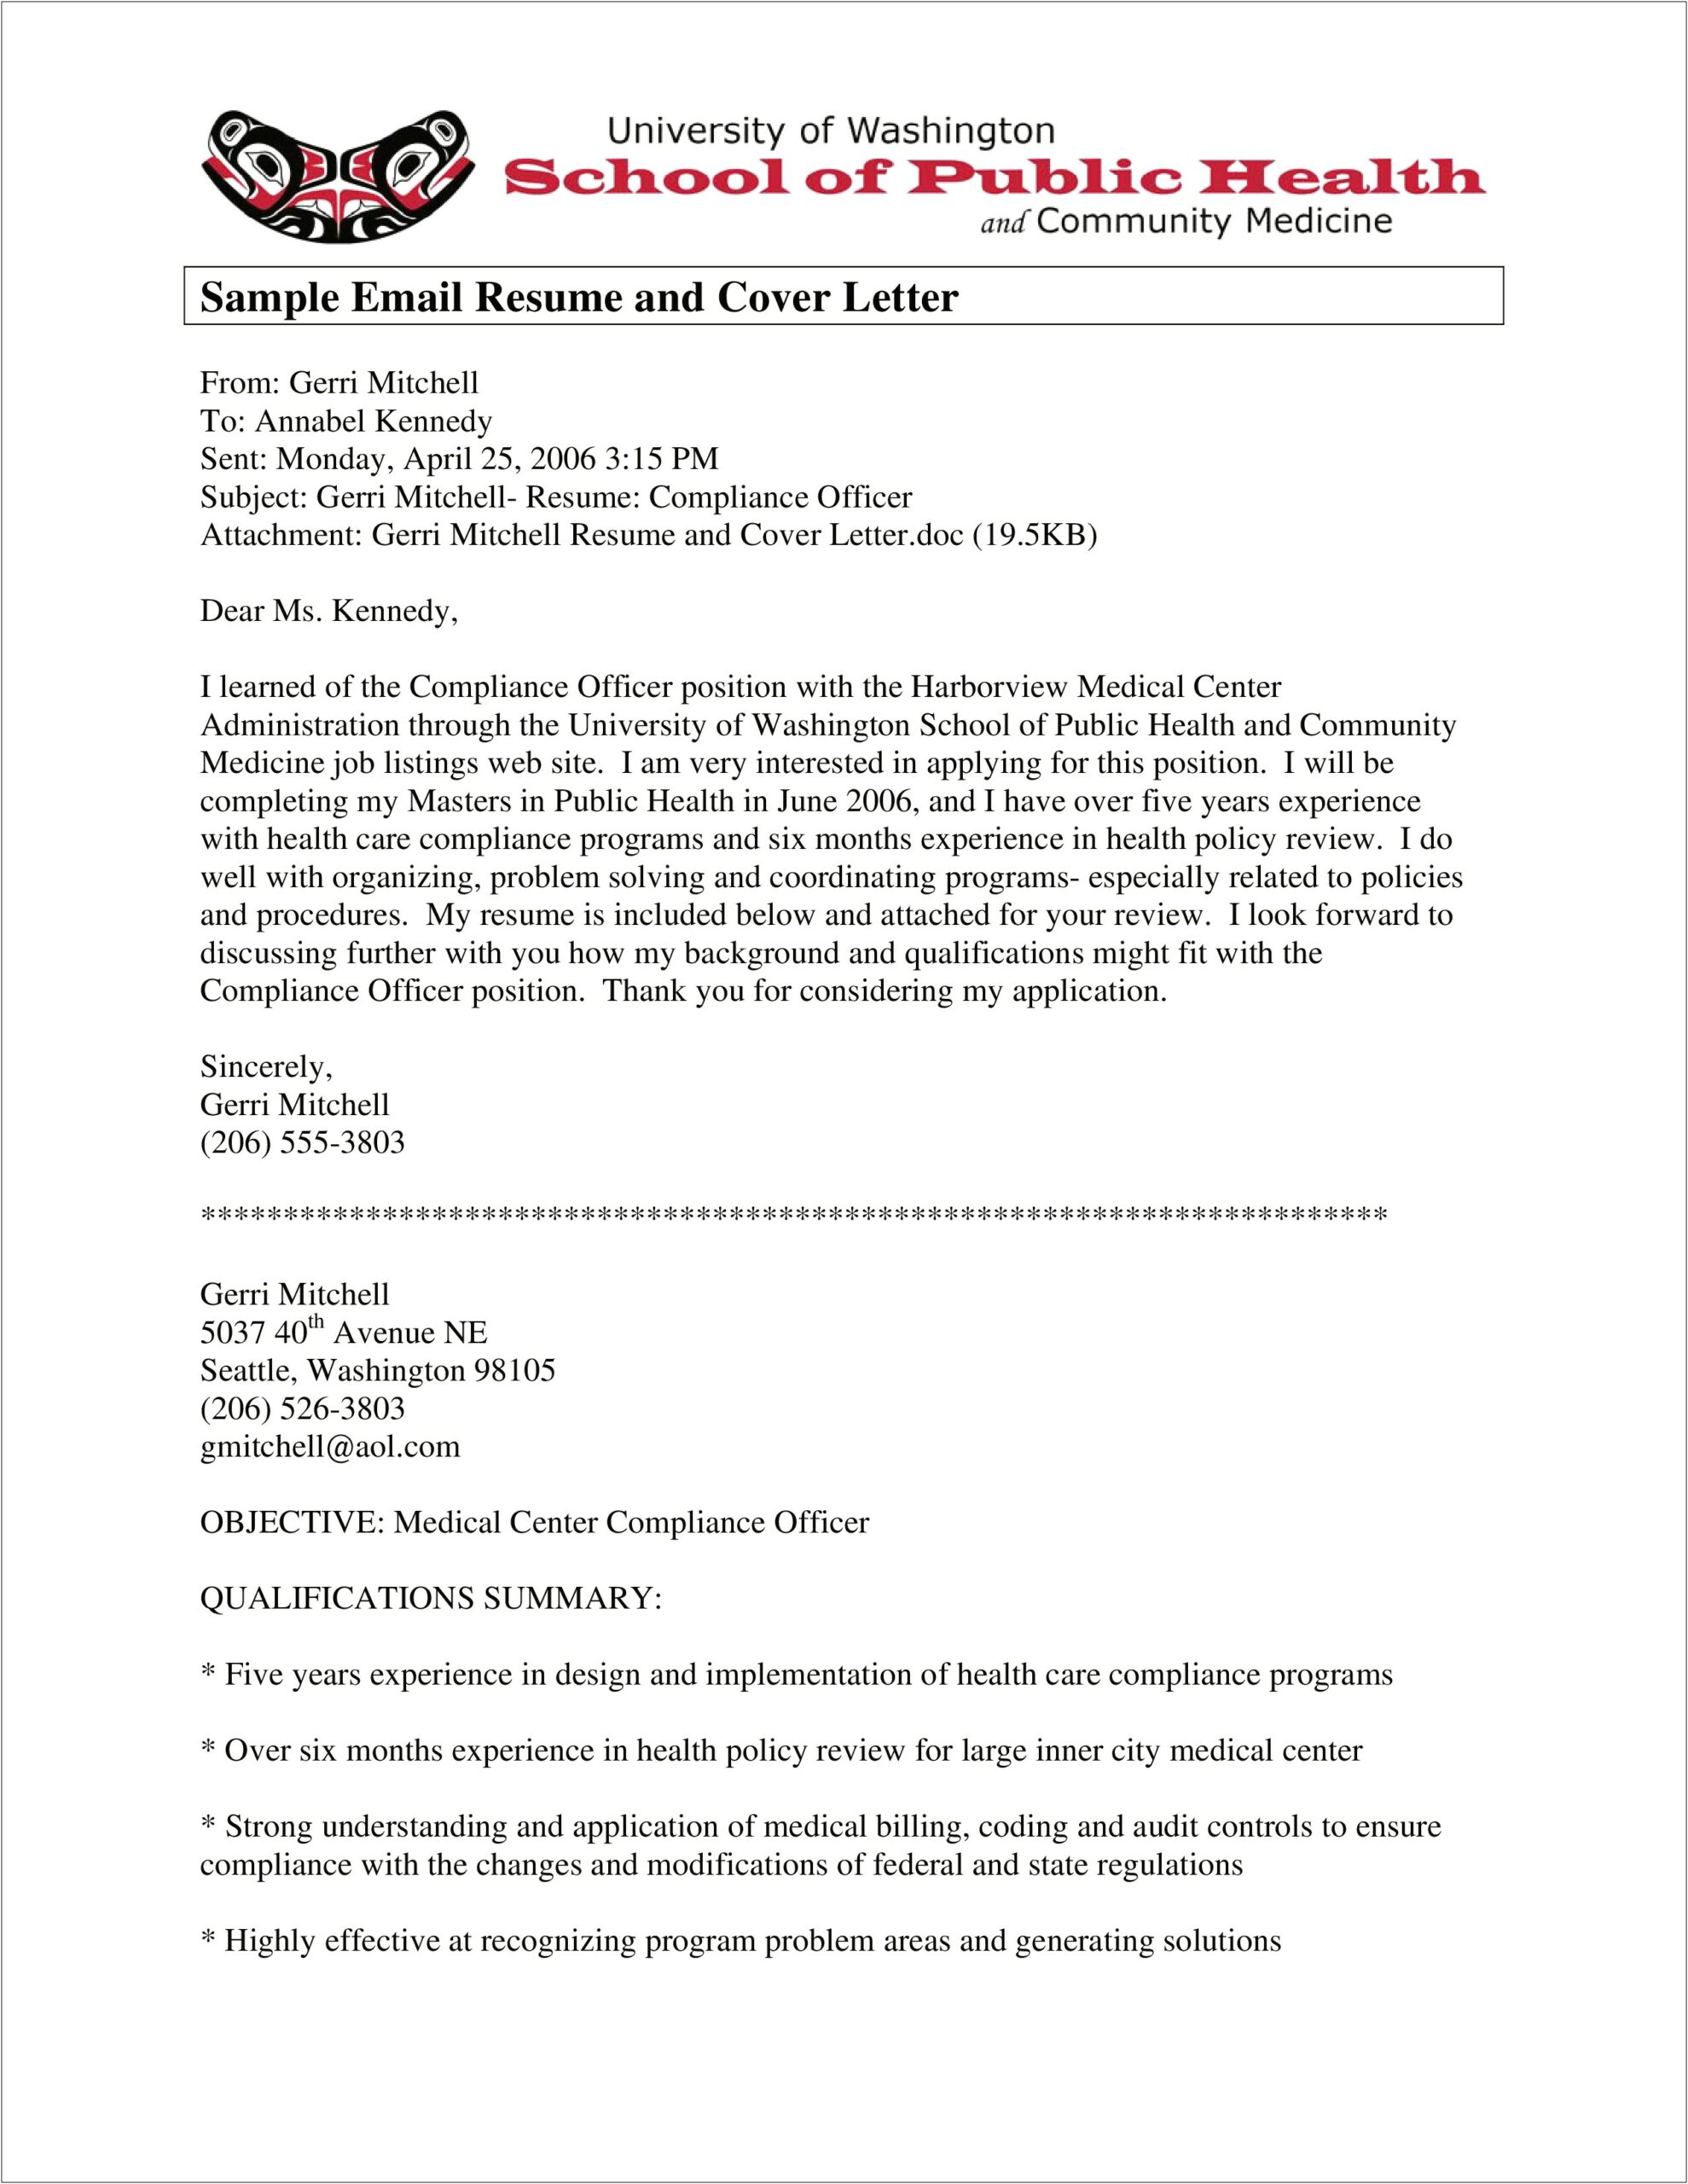 Cover Letter For Sending Resume By Email